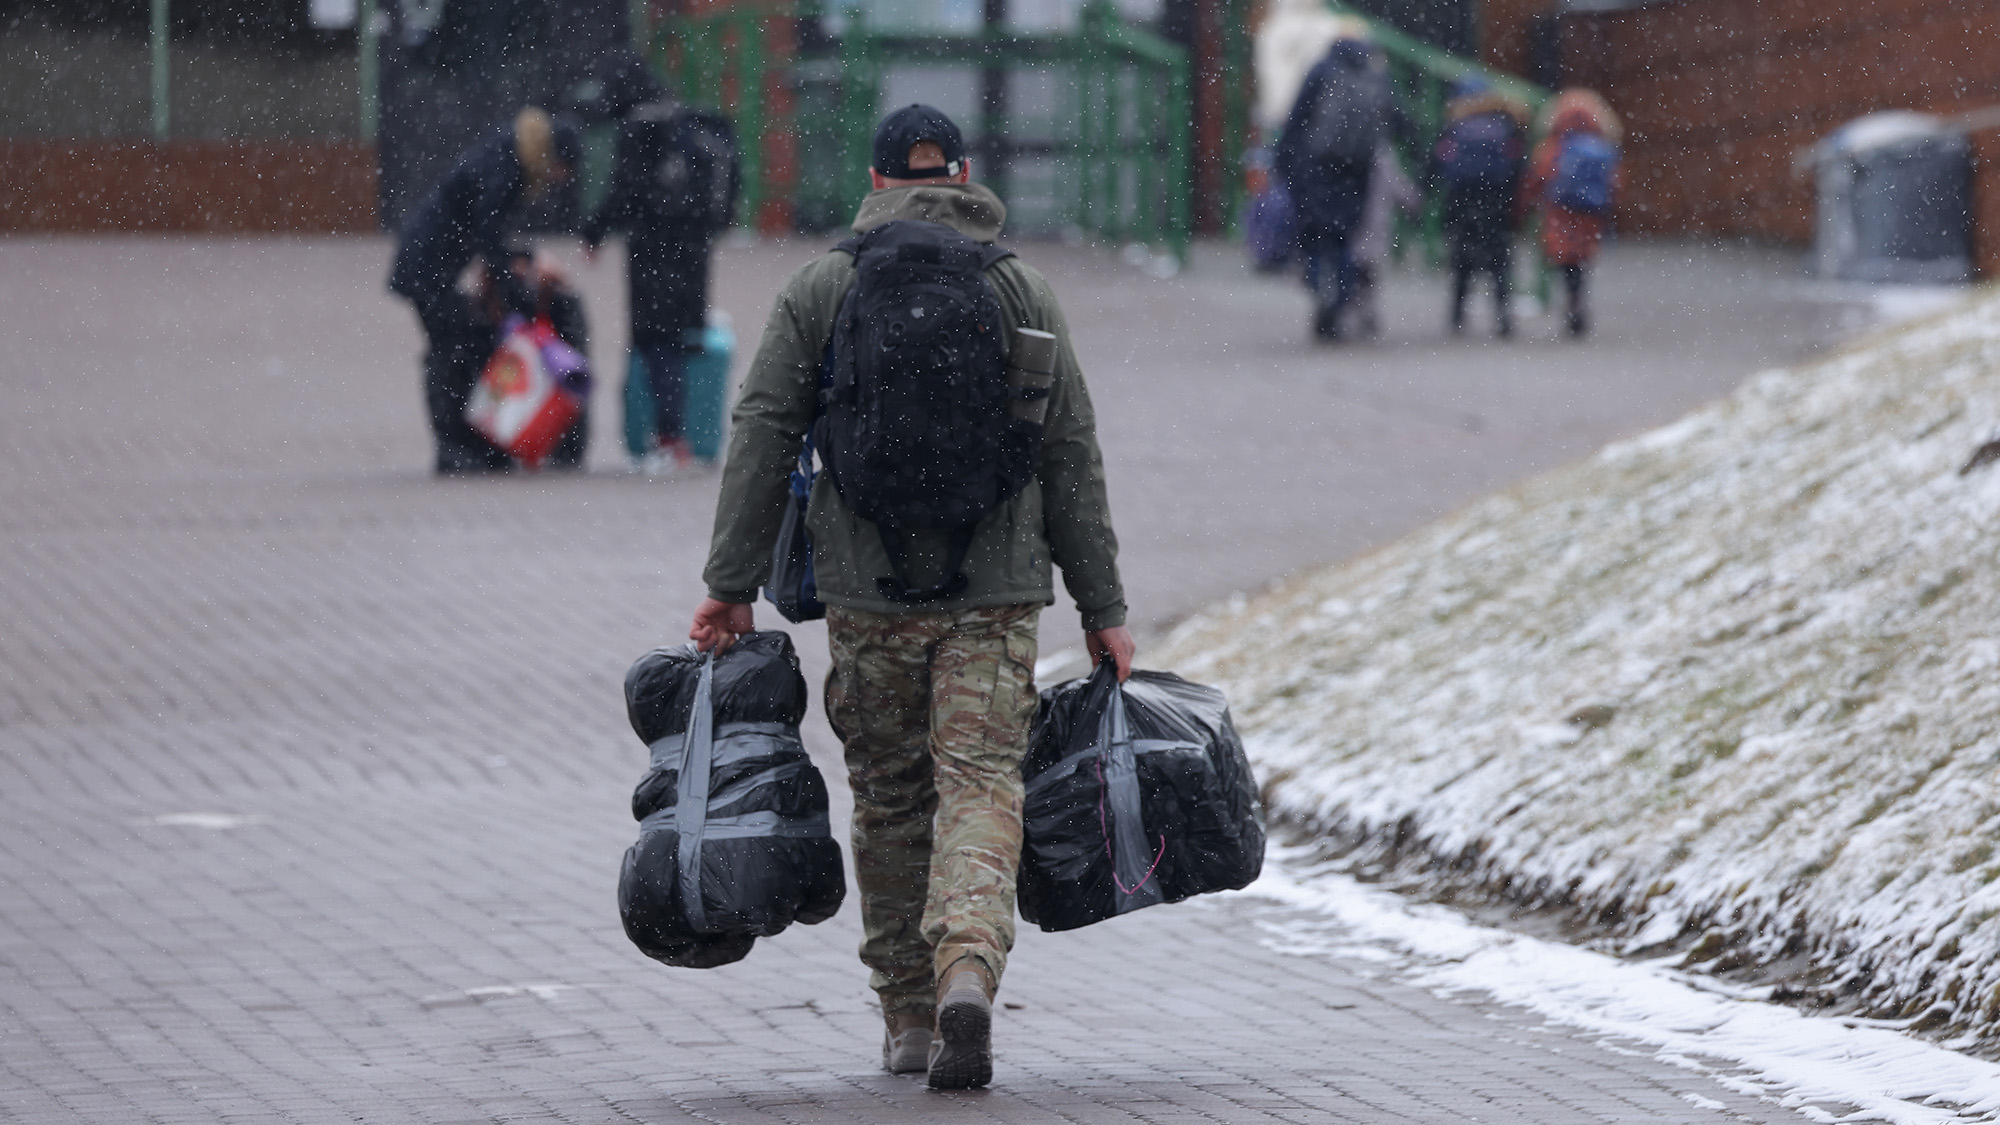 A man who said he wants to join the fight against the Russian army crosses into Ukraine at the Medyka border crossing on March 09, 2022